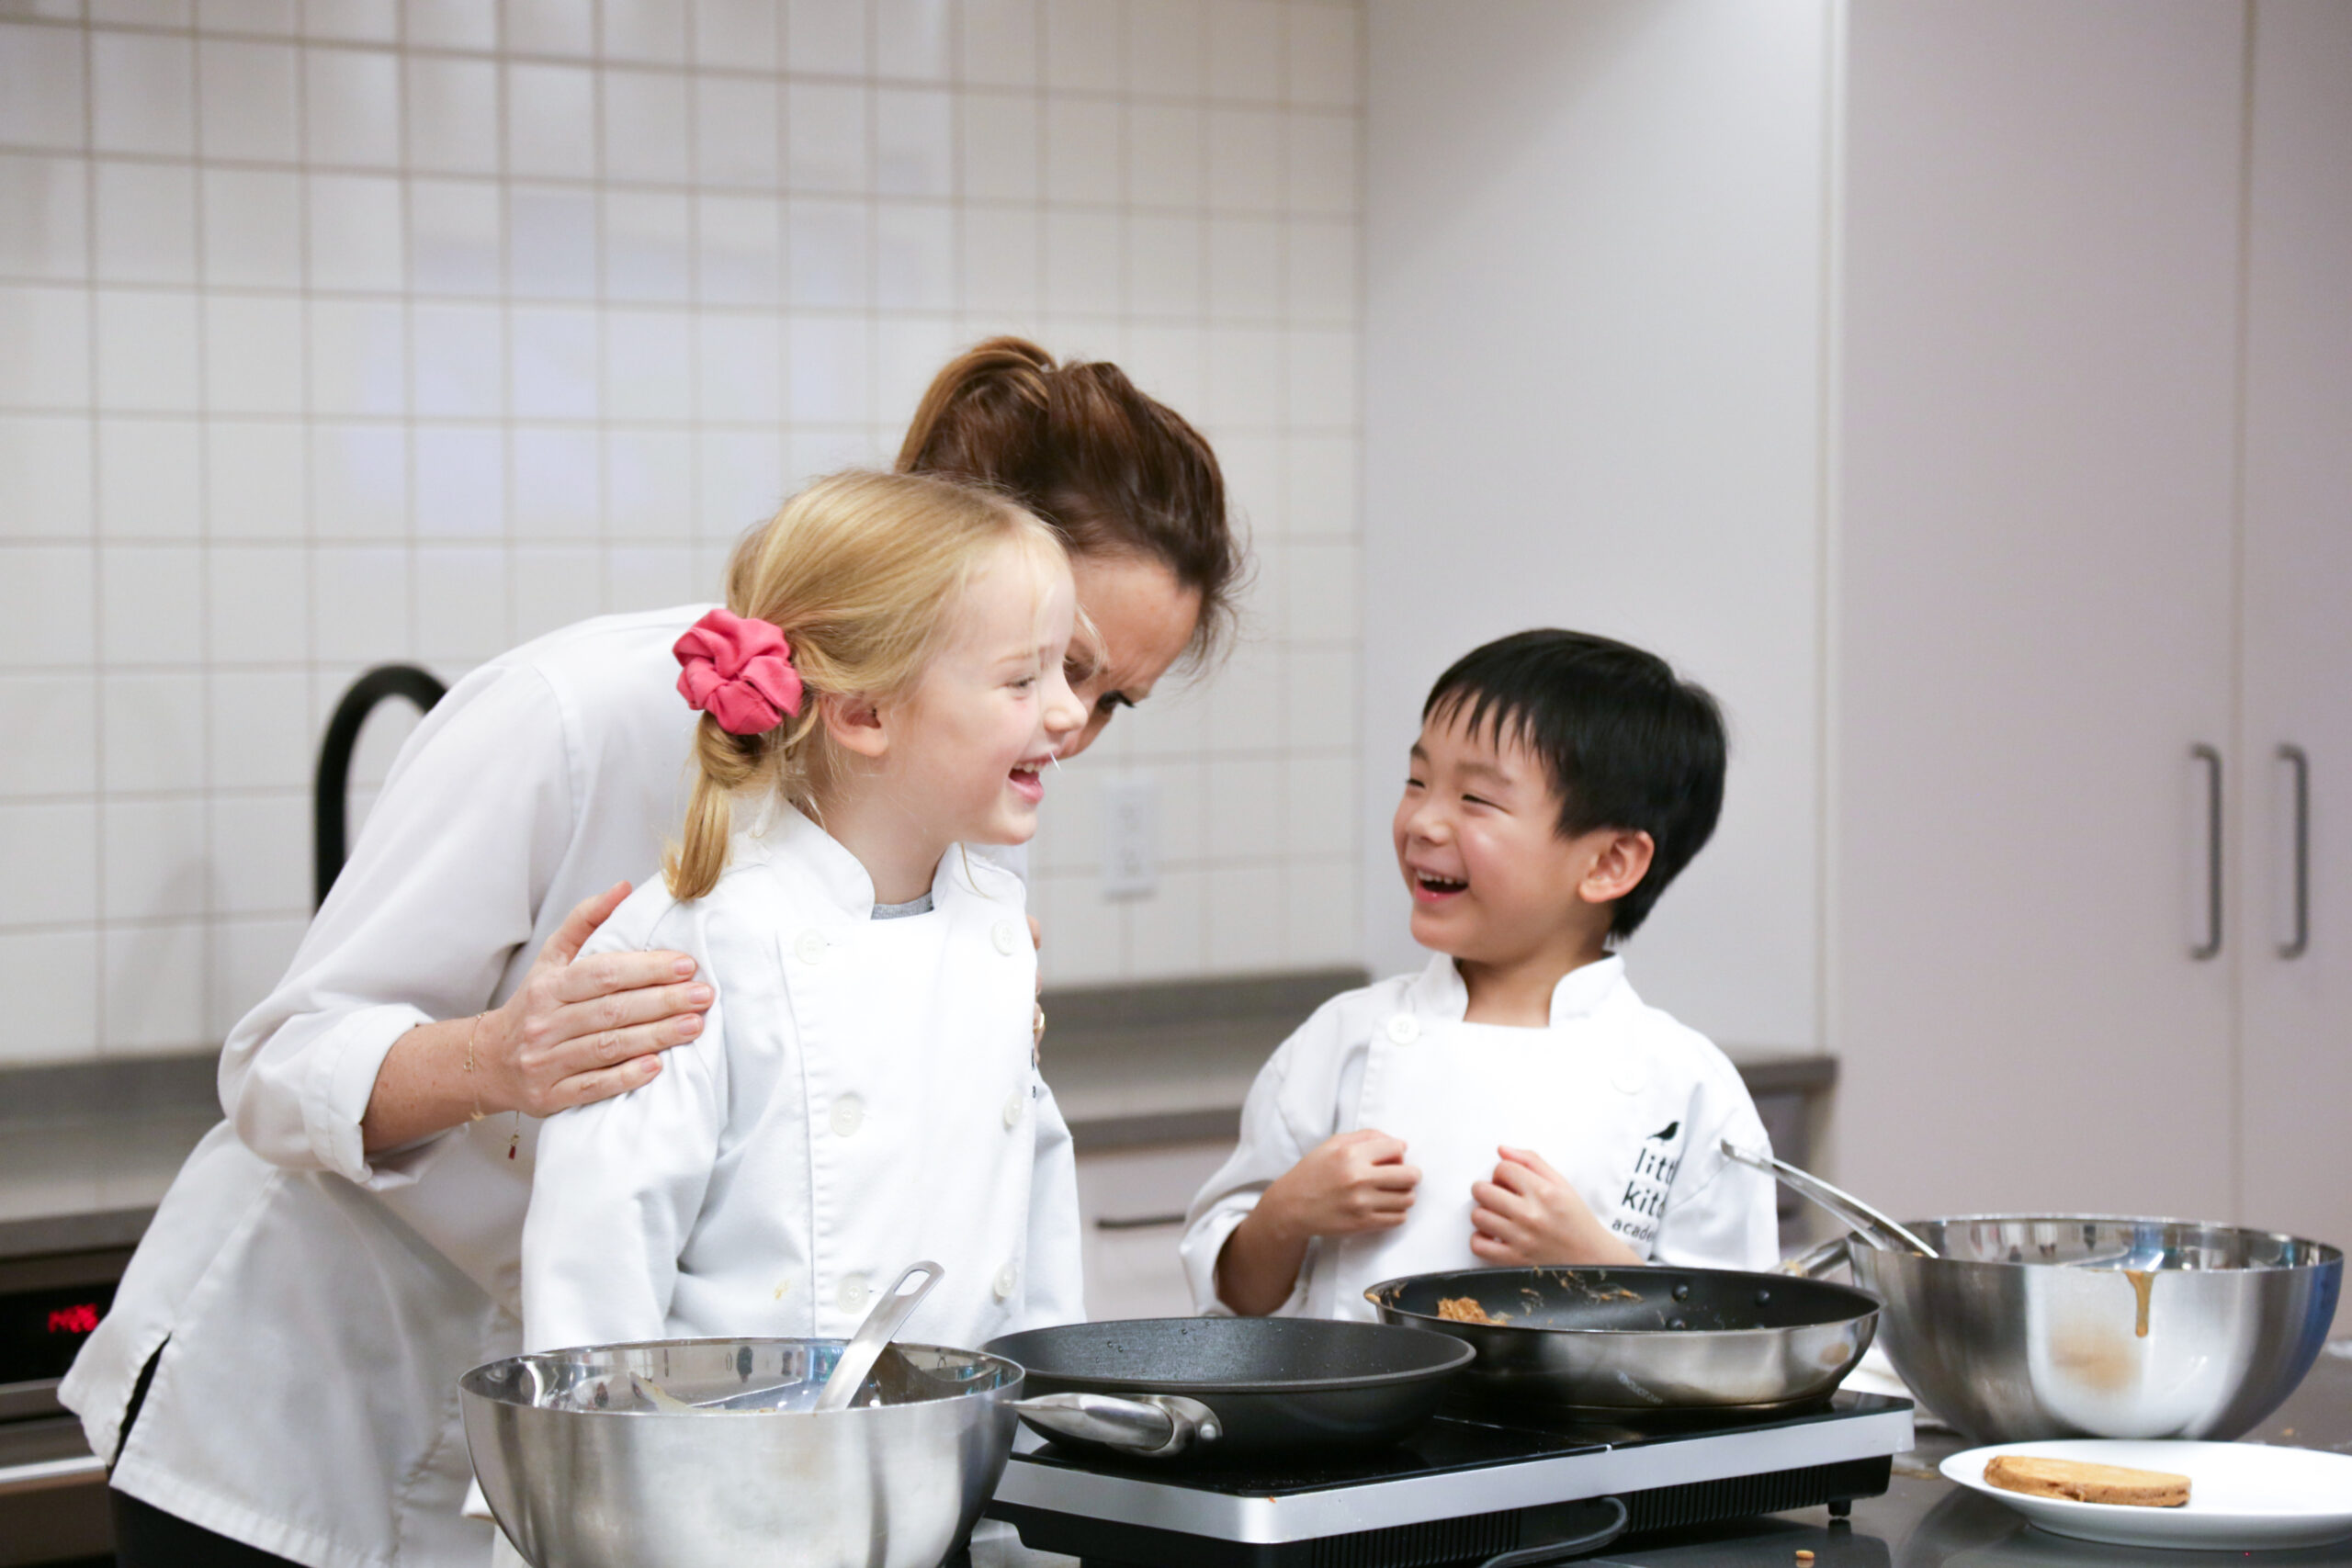 Little Kitchen Academy Cooking Lesson #1 Winter Meets Spring